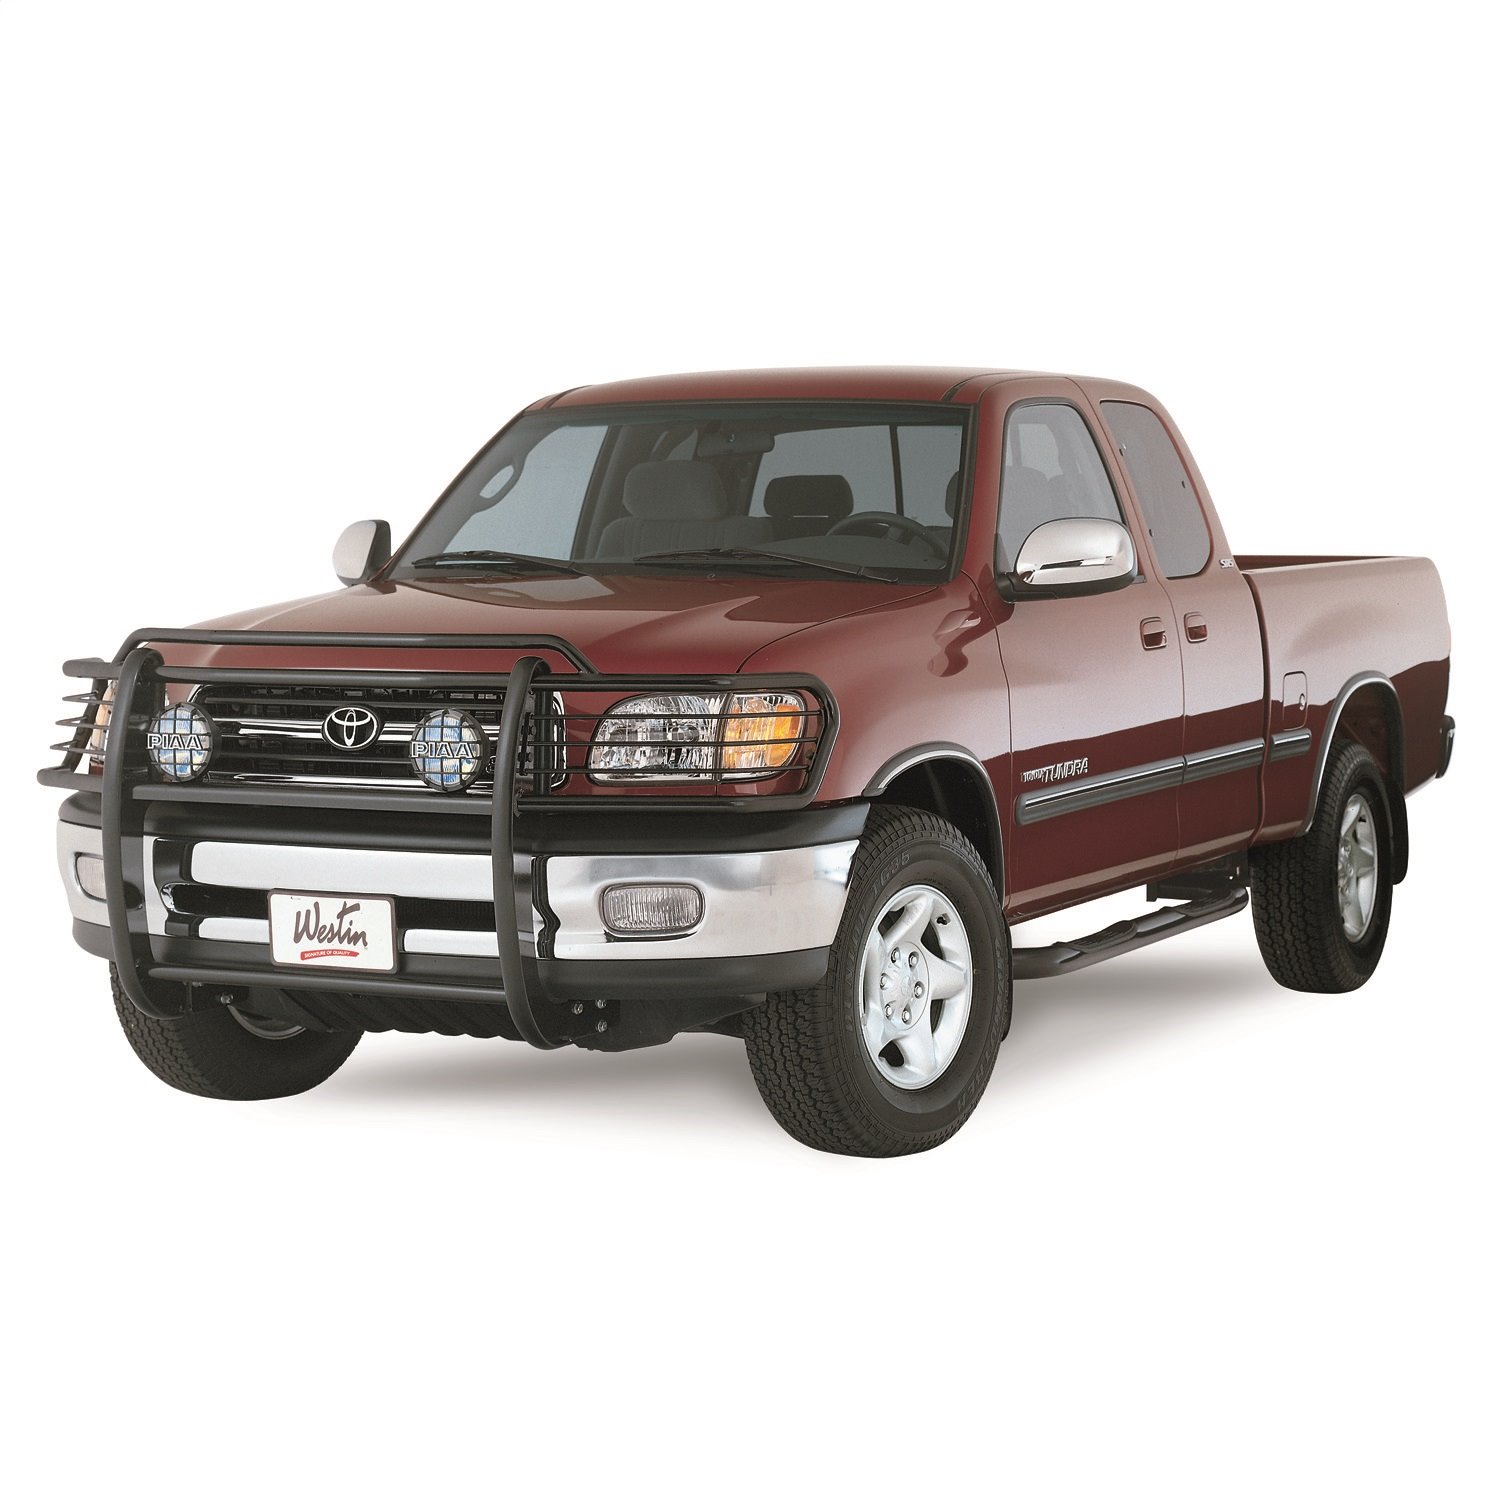 Sportsman Grille Guard 2003-06 Toyota Tundra (Except D-Cab)